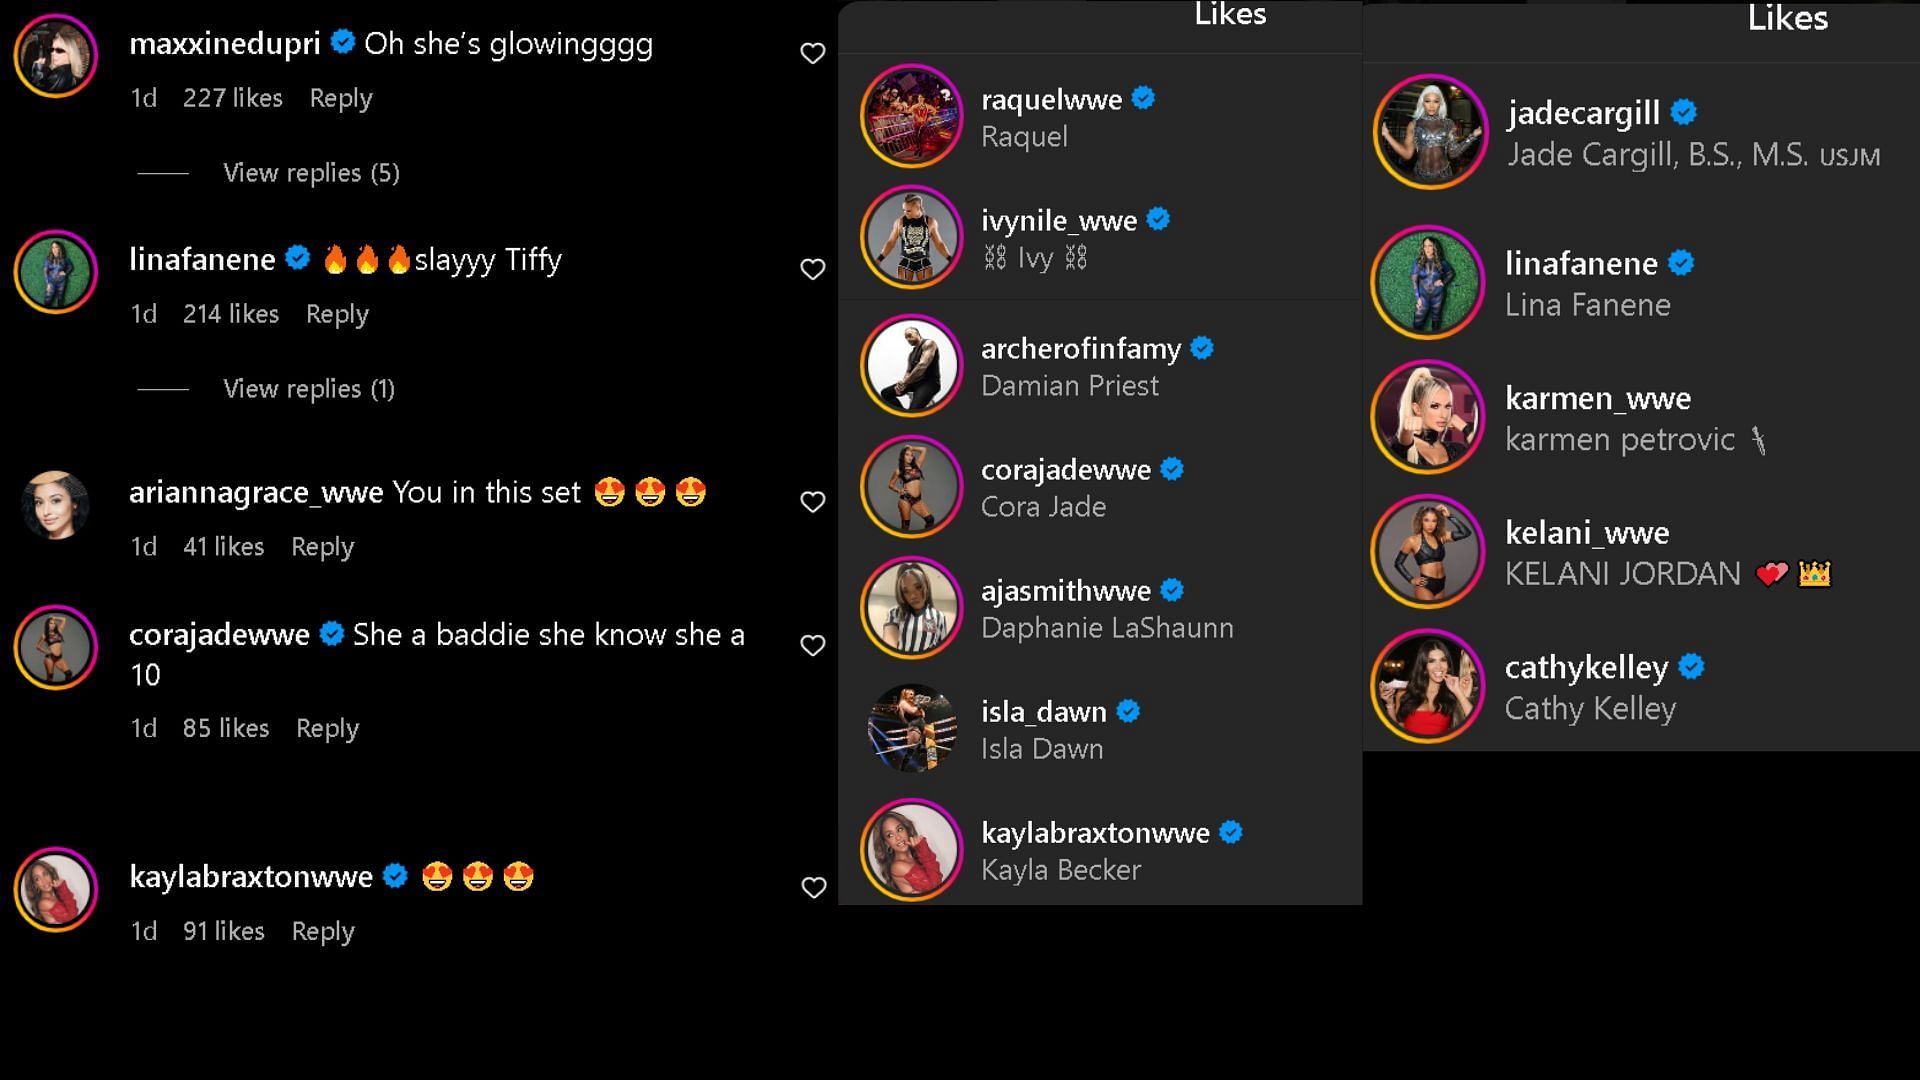 A screengrab of reactions on the Instagram post.